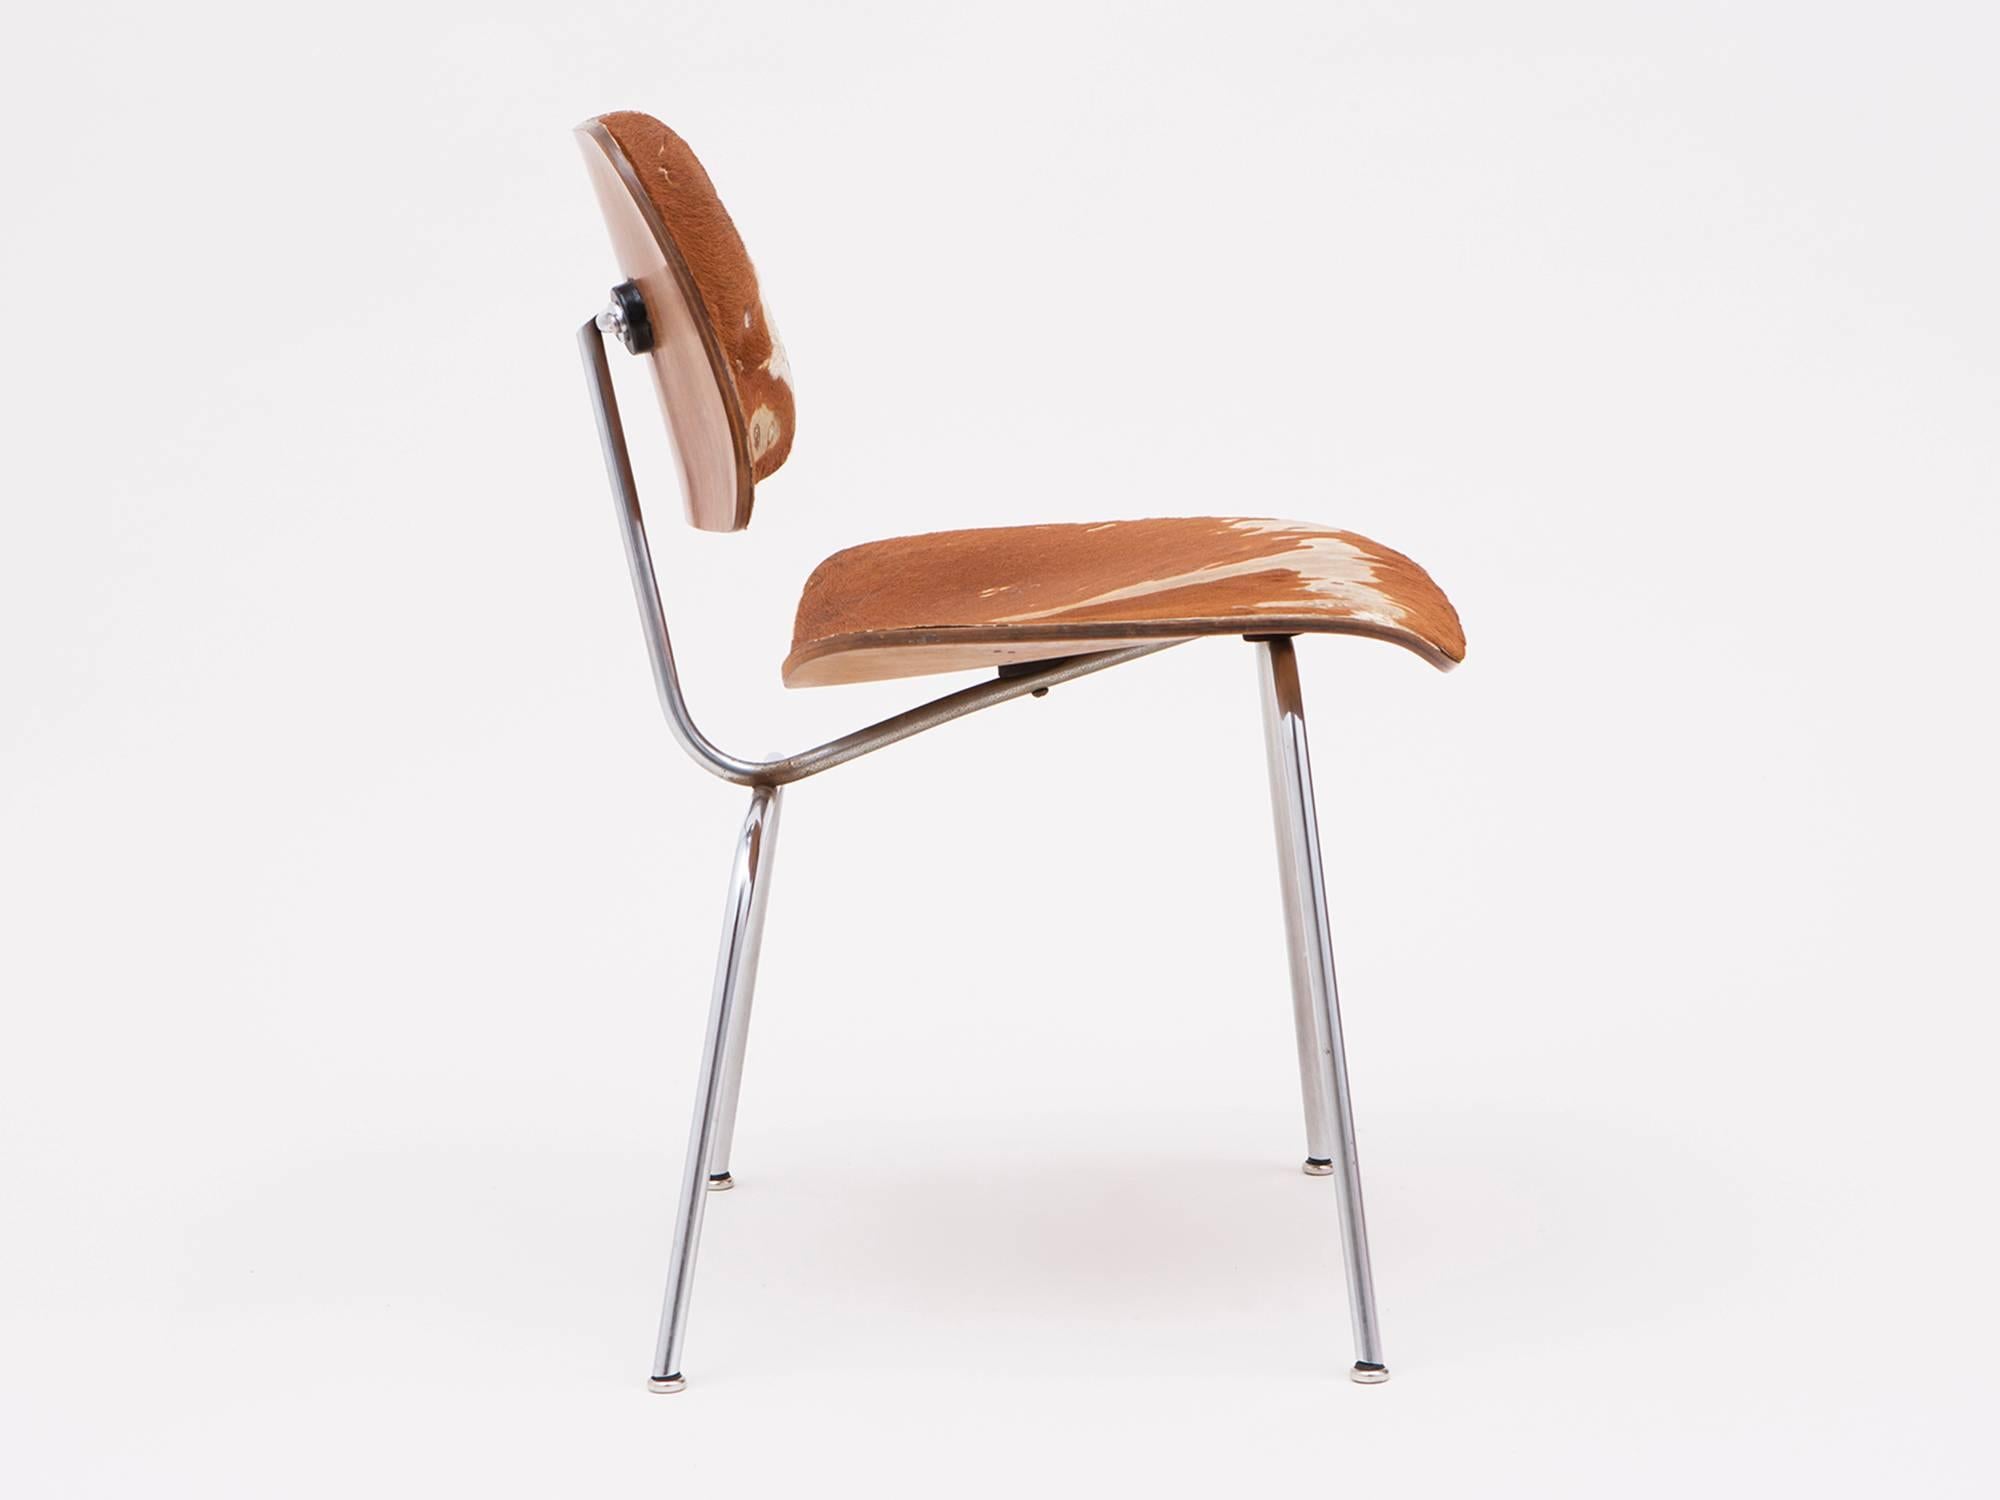 An early DCM dining chair, designed by Charles and Ray Eames and manufactured by Herman Miller, circa 1948. This chair is especially rare, made of ash plywood and steel with original slunk skin or fur upholstery.